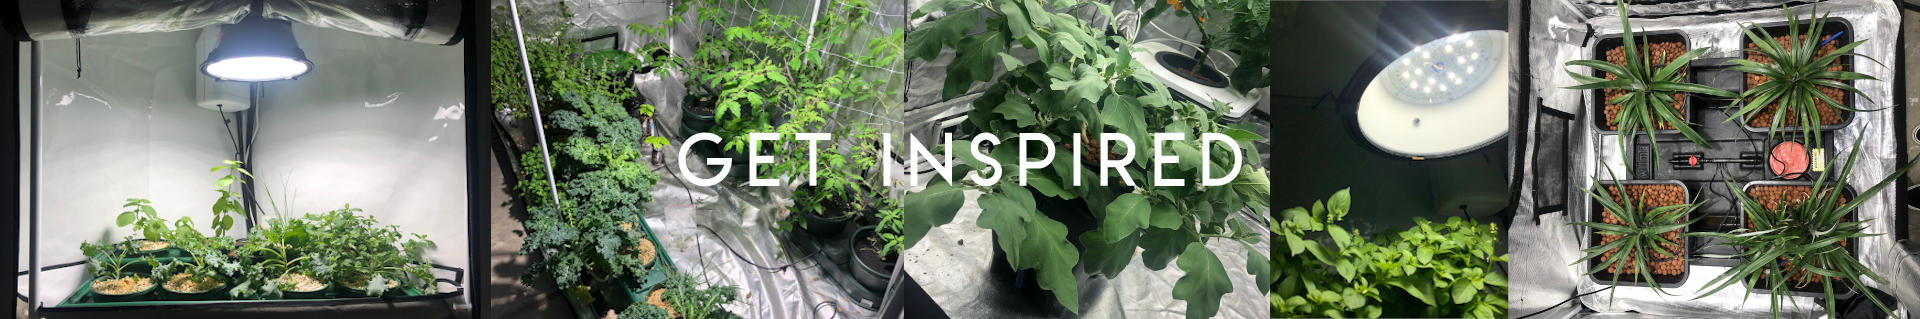 Get Inspired - Hydroponic & Aquaponic Garden Photos